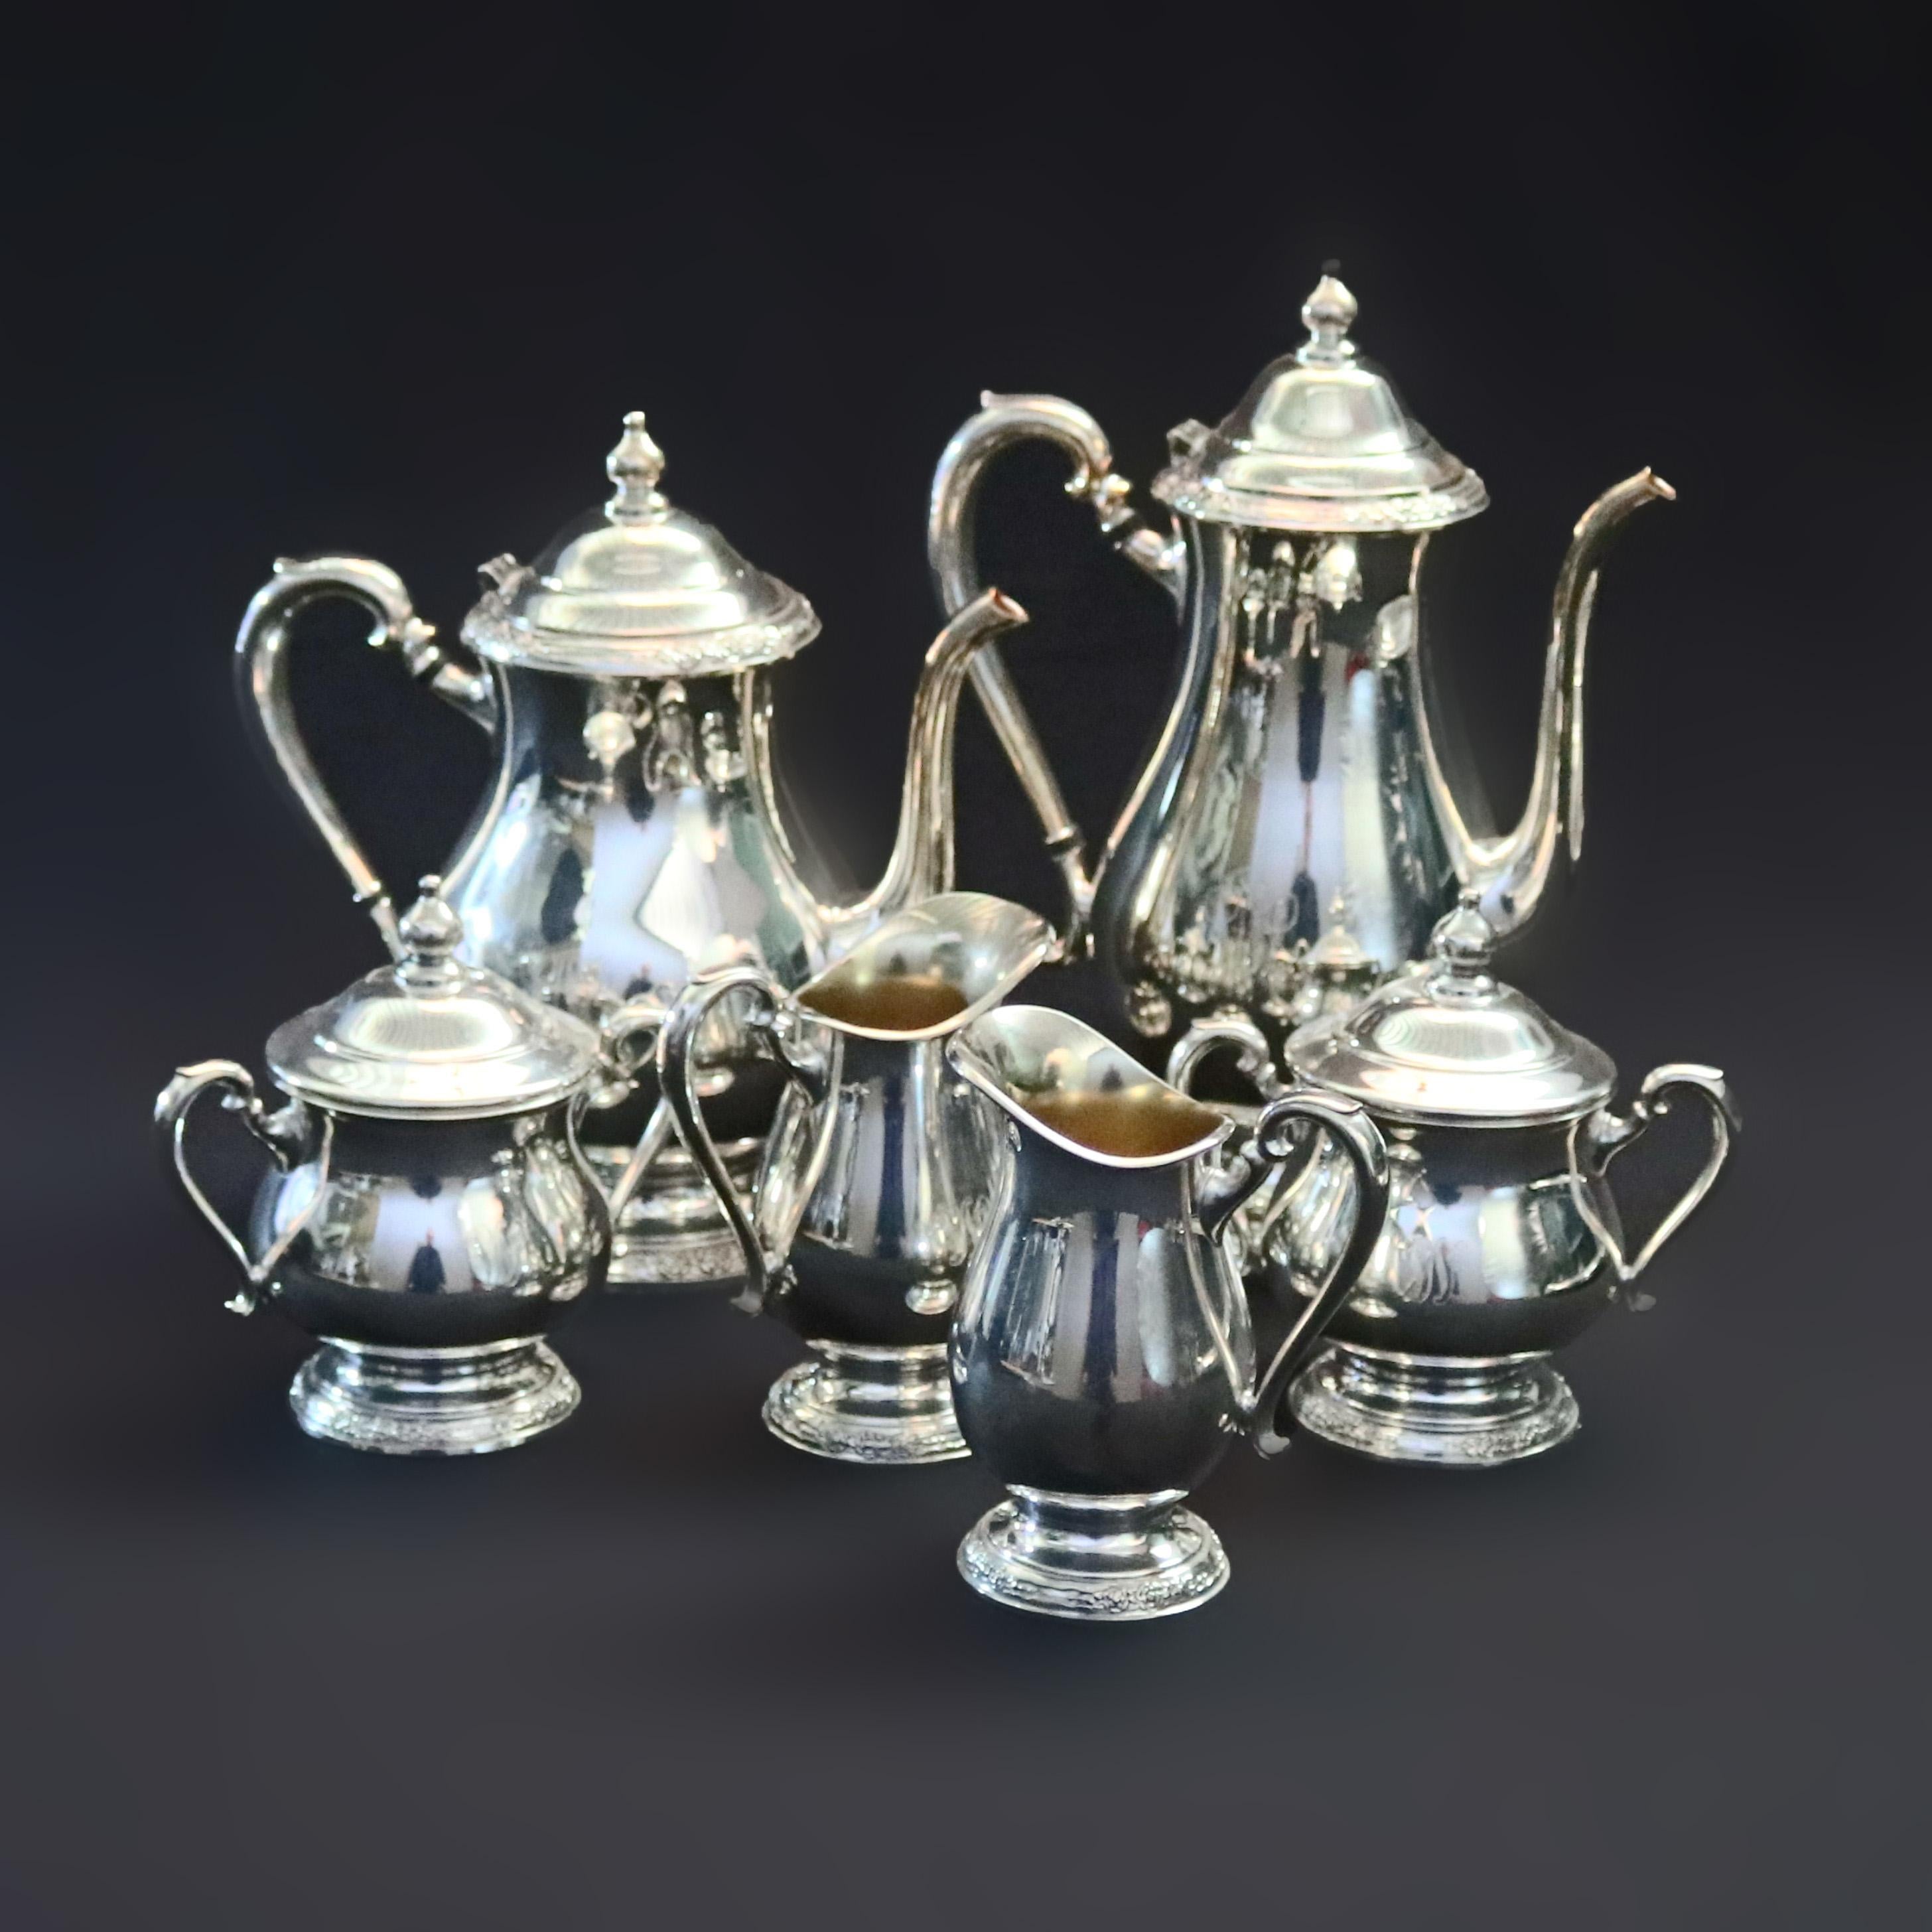 An eight-piece silver plate coffee and tea service offers bulbous form with footed bases with 